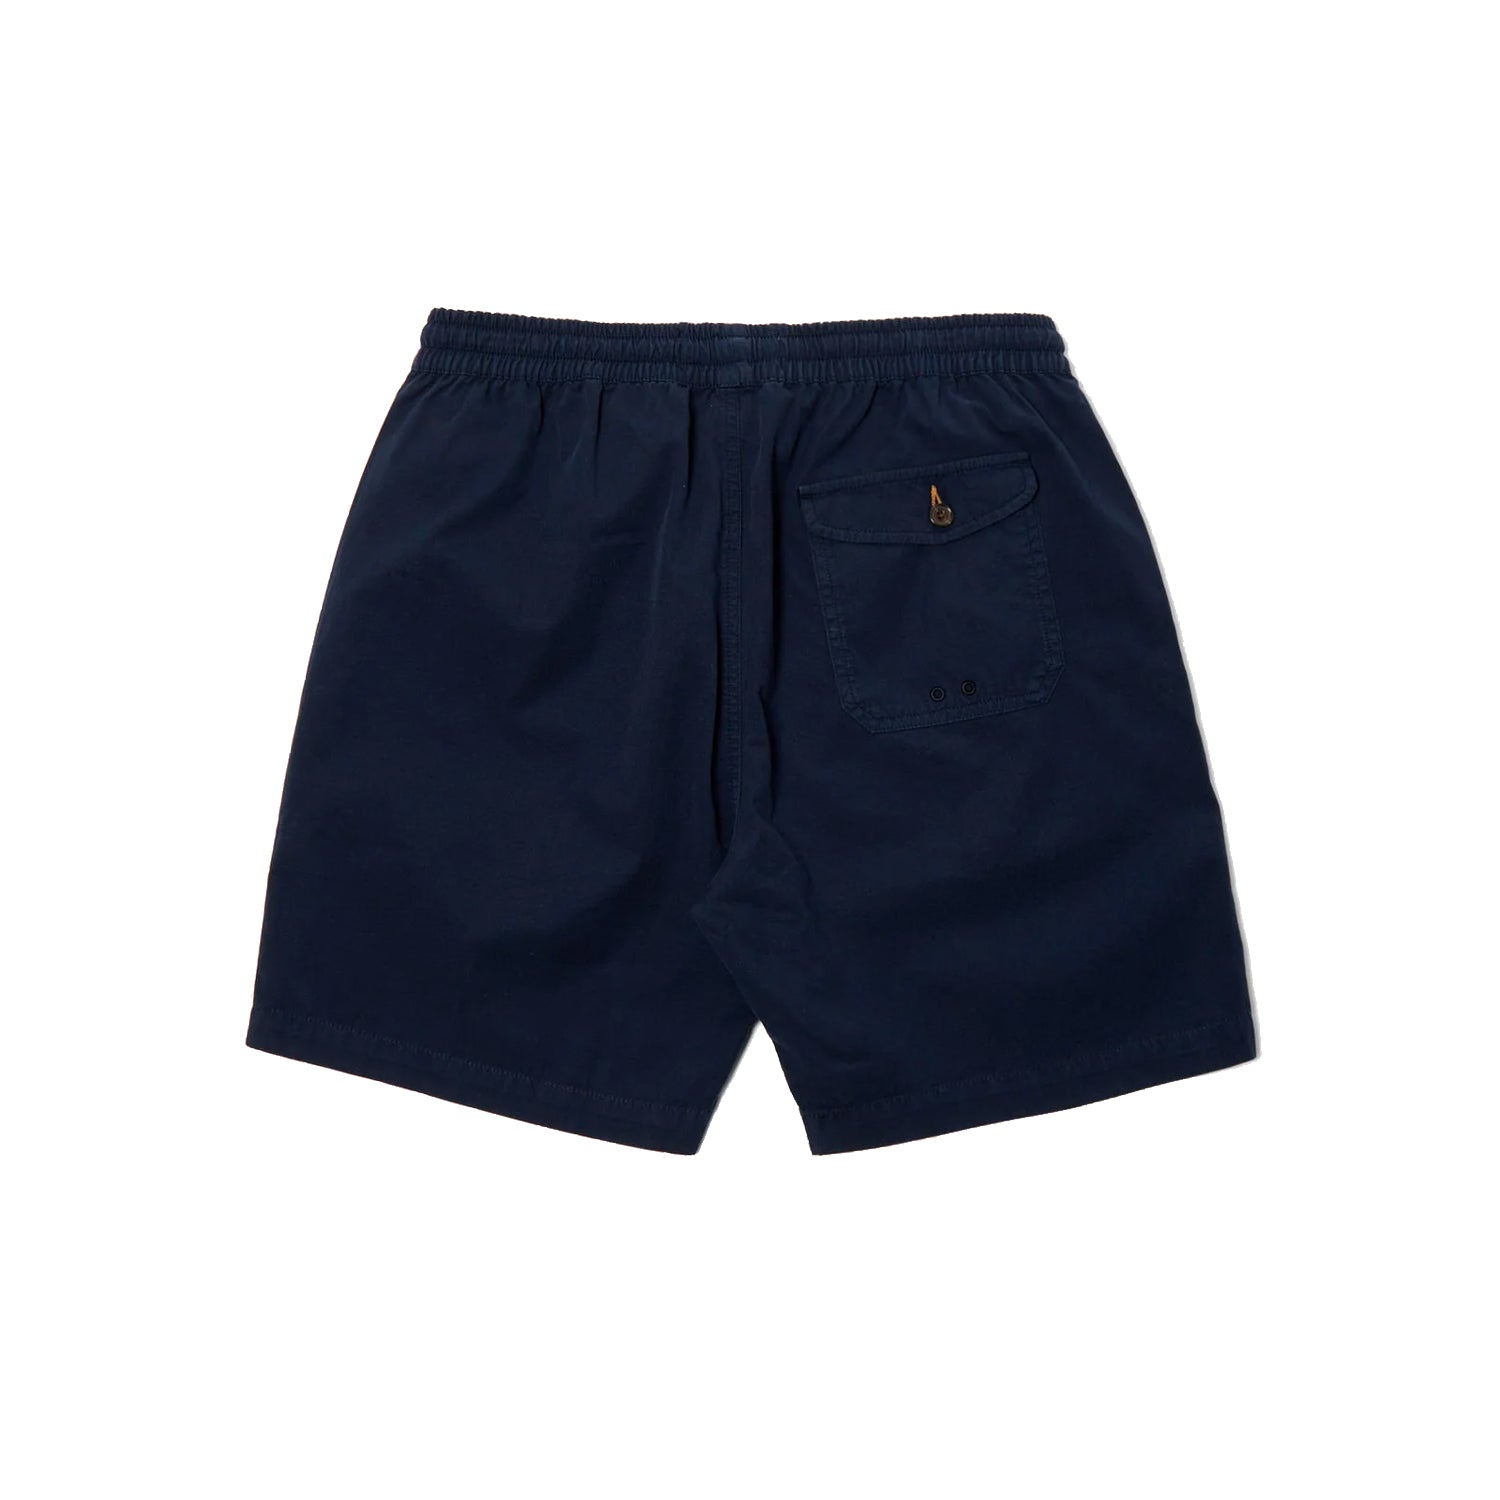 Beach Short - Summer Canvas NAVY
A high-quality mid-weight canvas, durable and tightly woven for a perfect crisp summer cotton fabric.
 
• Product Code: 28535.
• Elasticated waist with cord.
• No fly.
• Two front pockets.
• Single rear button-flap patch pocket.
• Tape detail.
• Fabric Content: 100% Cotton, 100% Cotton Trim.
• Washcare: Wash at 30 degrees. Do not bleach. Do not tumble dry. Warm iron. Do not dry clean. Wash like colours together. UNIVERSAL WORKS